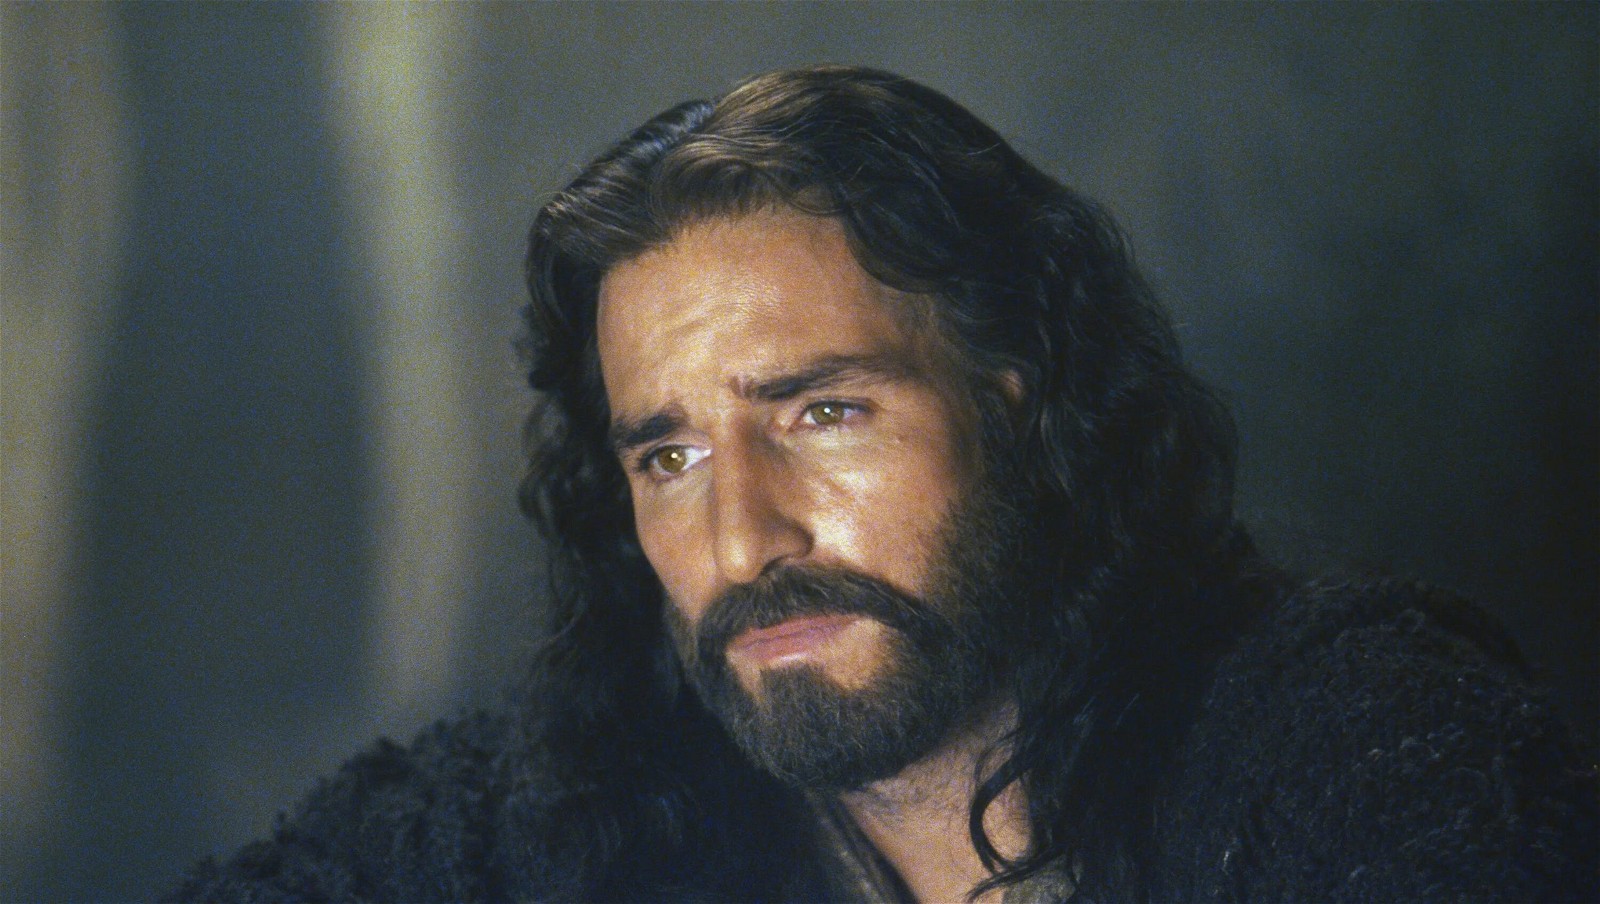 Jim Caviezel as Jesus in The Passion of the Christ (2004).